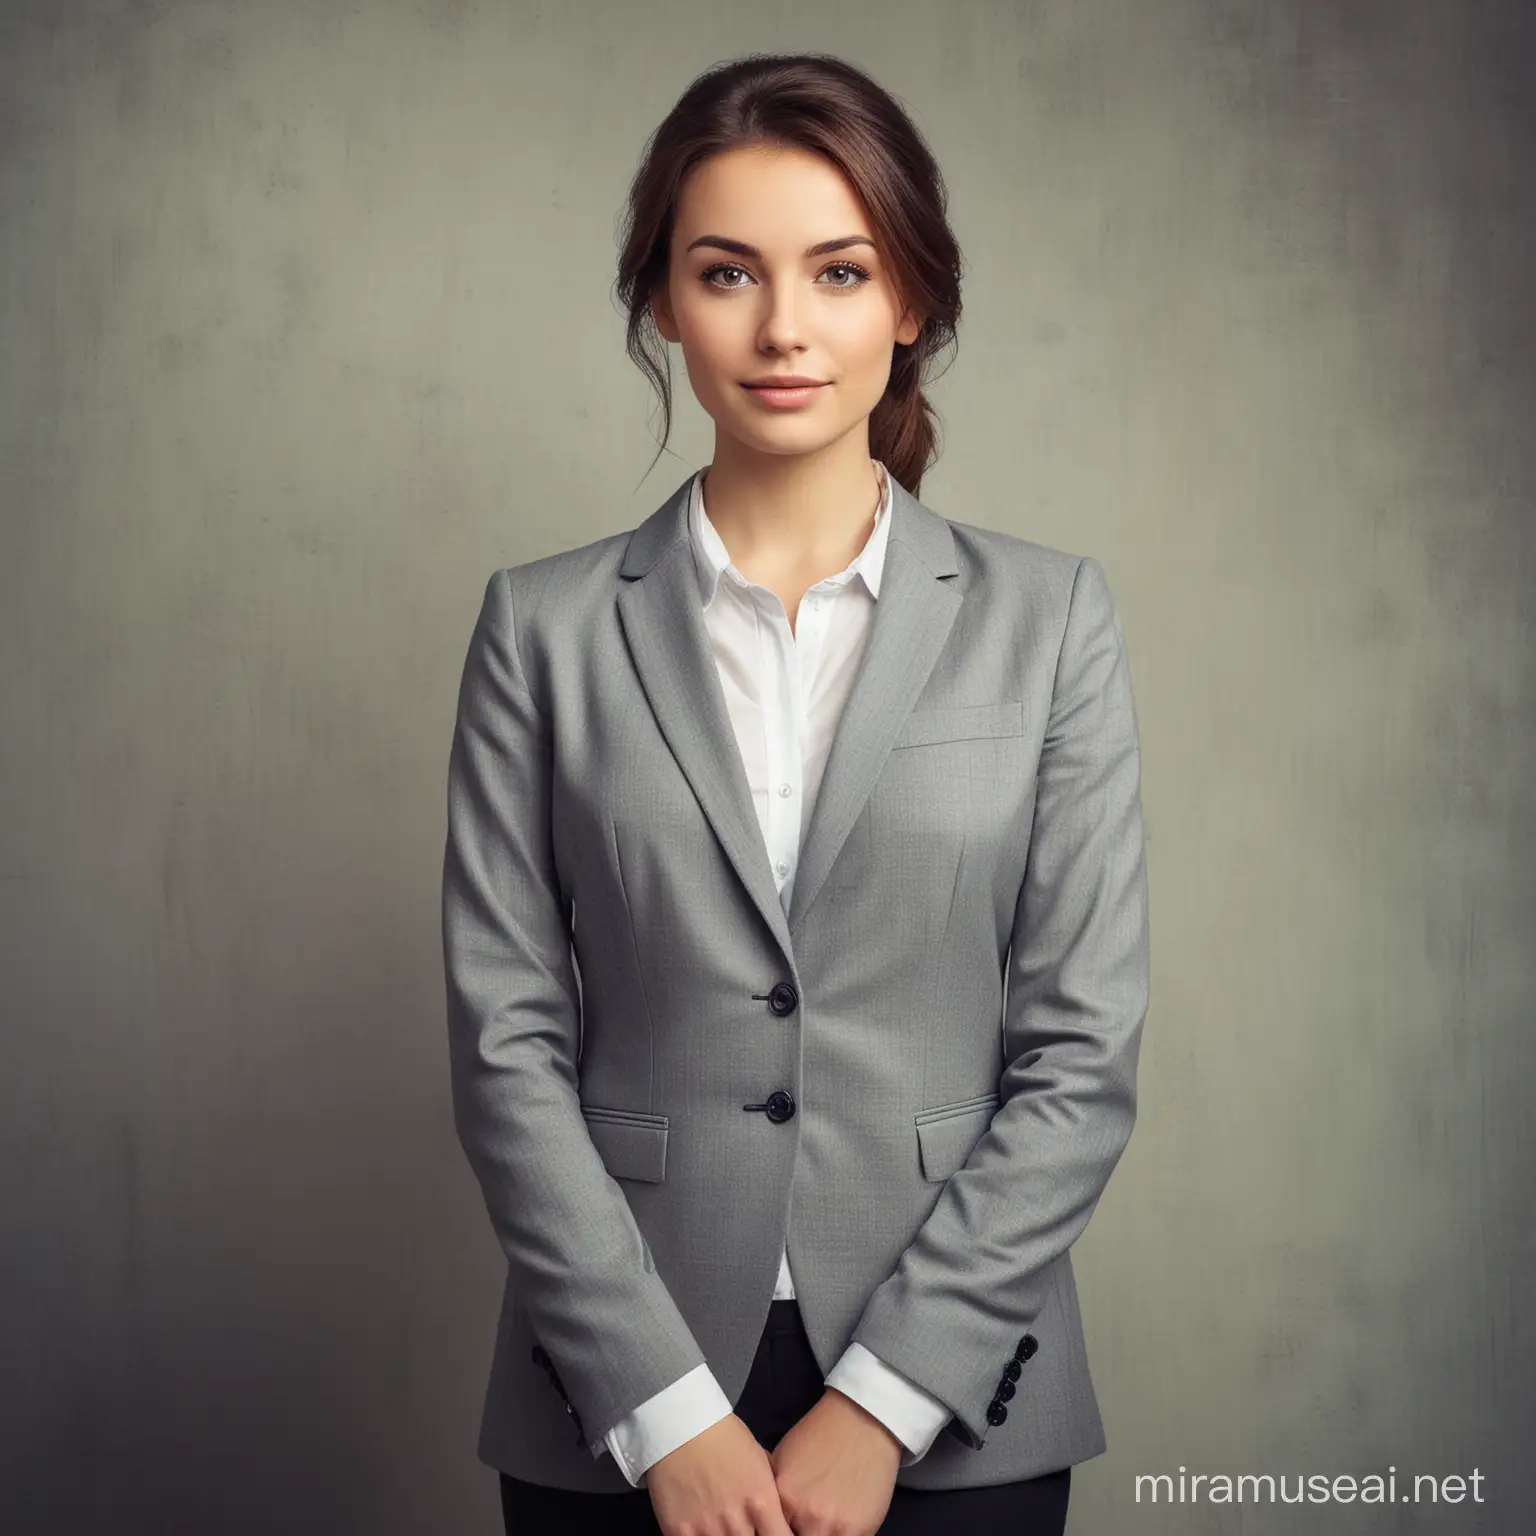 Professional Young Woman in Aligned Formal Attire